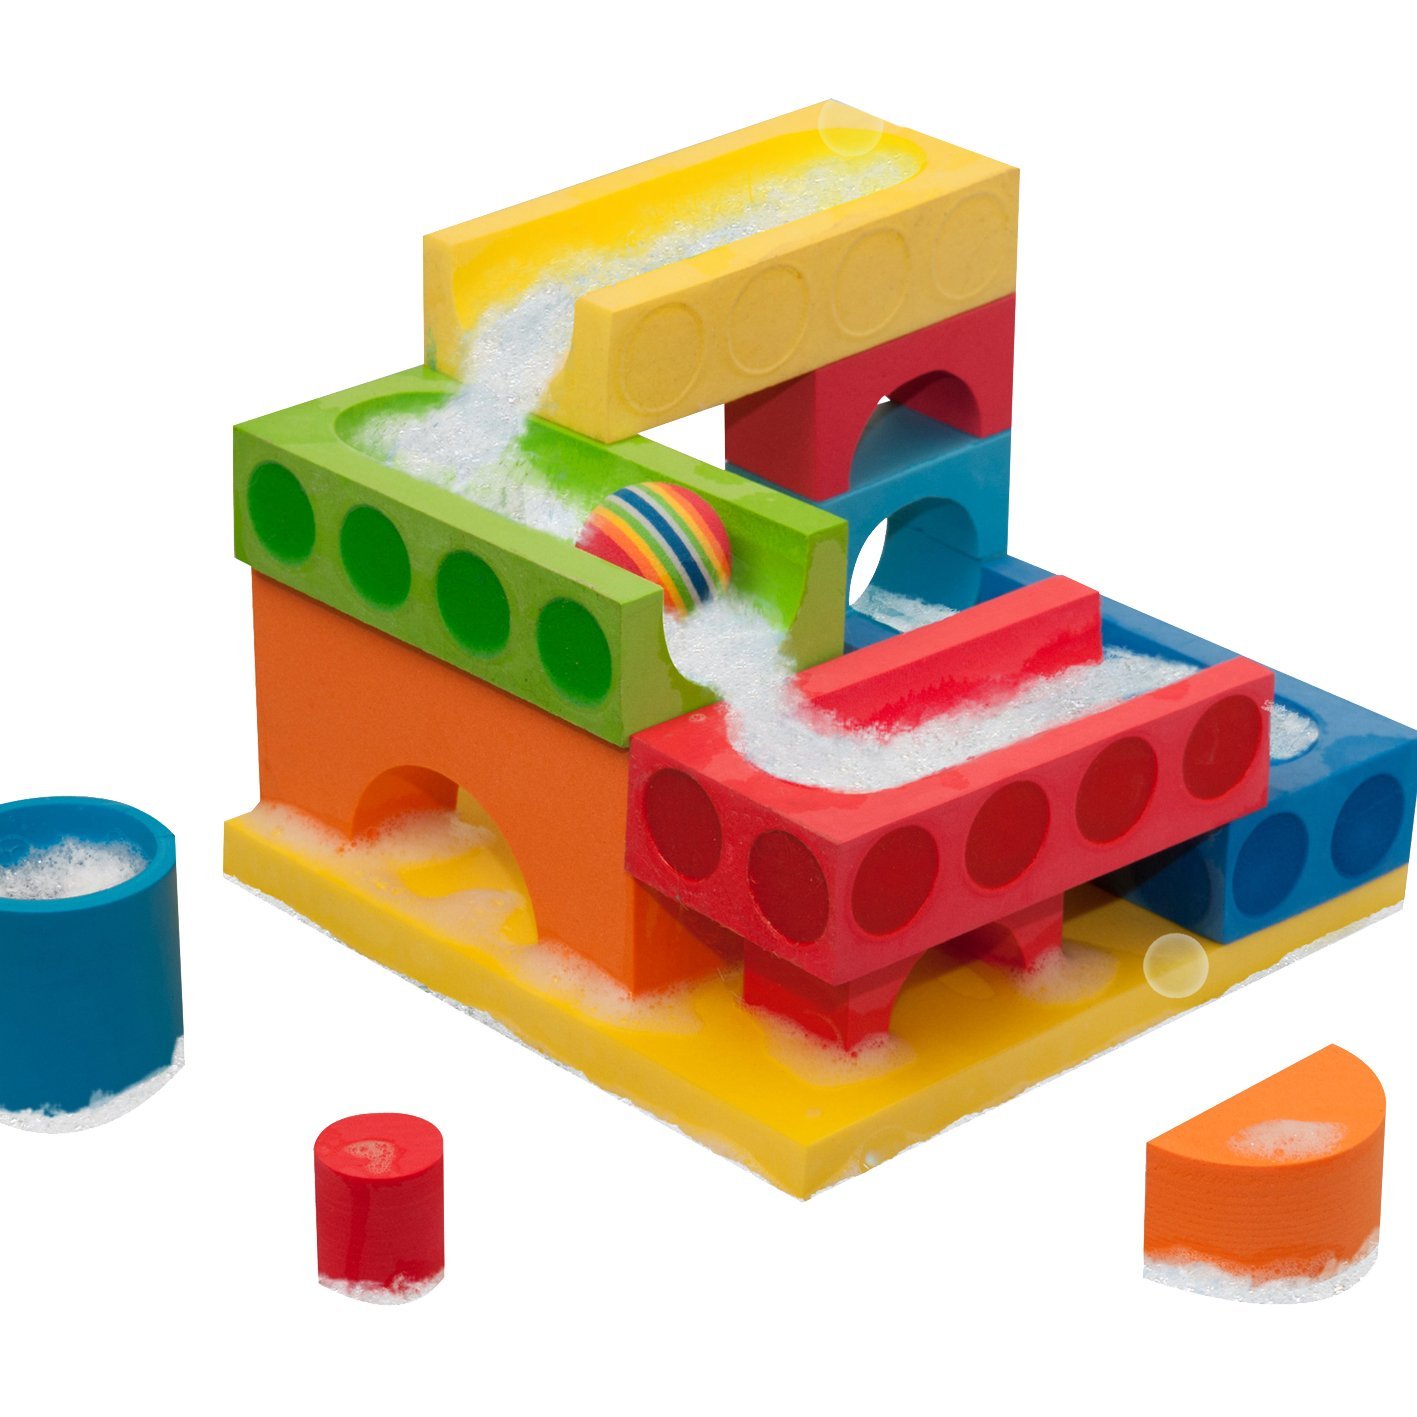 Here are our favorite STEM toys and tools for teaching little learners. These are perfect for preschool, kindergarten, and first grade students.